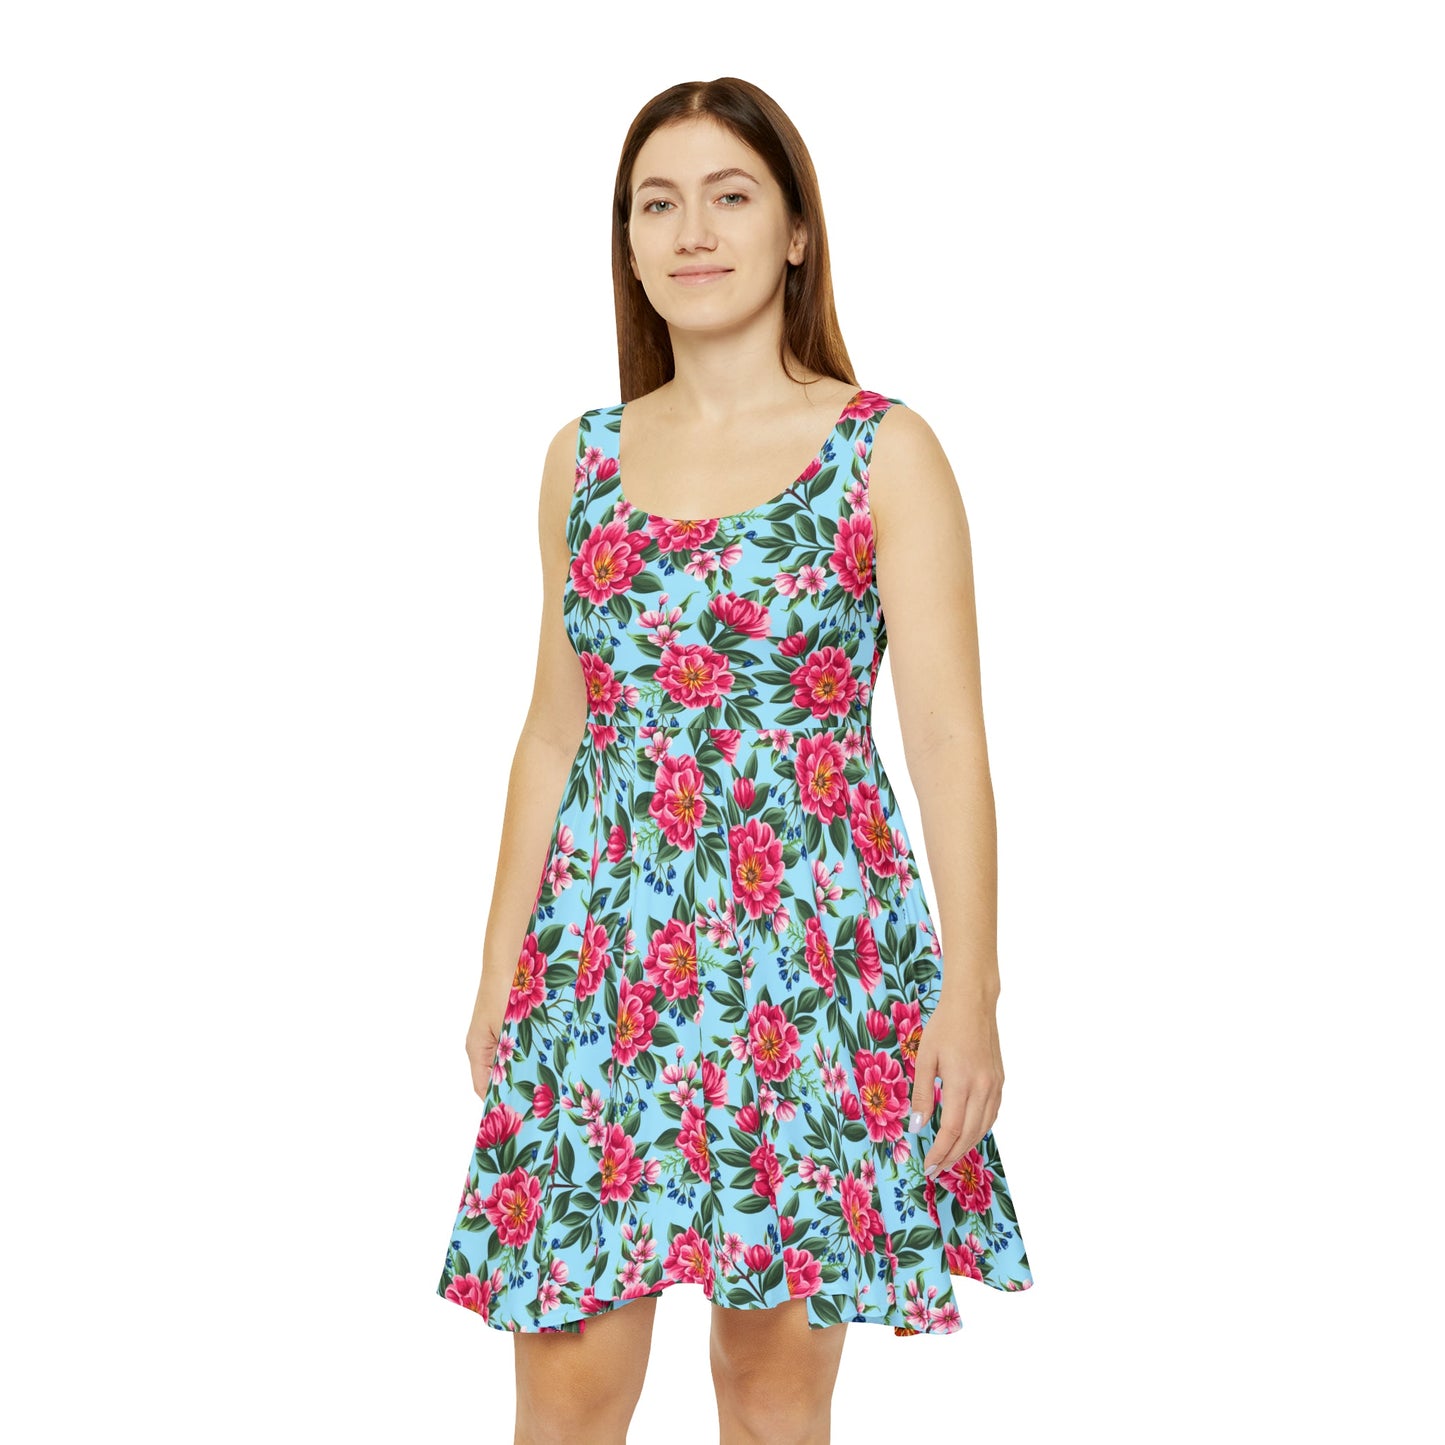 All Over Prints - Women's Skater Dress Sea Of Peonies Teal Background Pink And Yellow